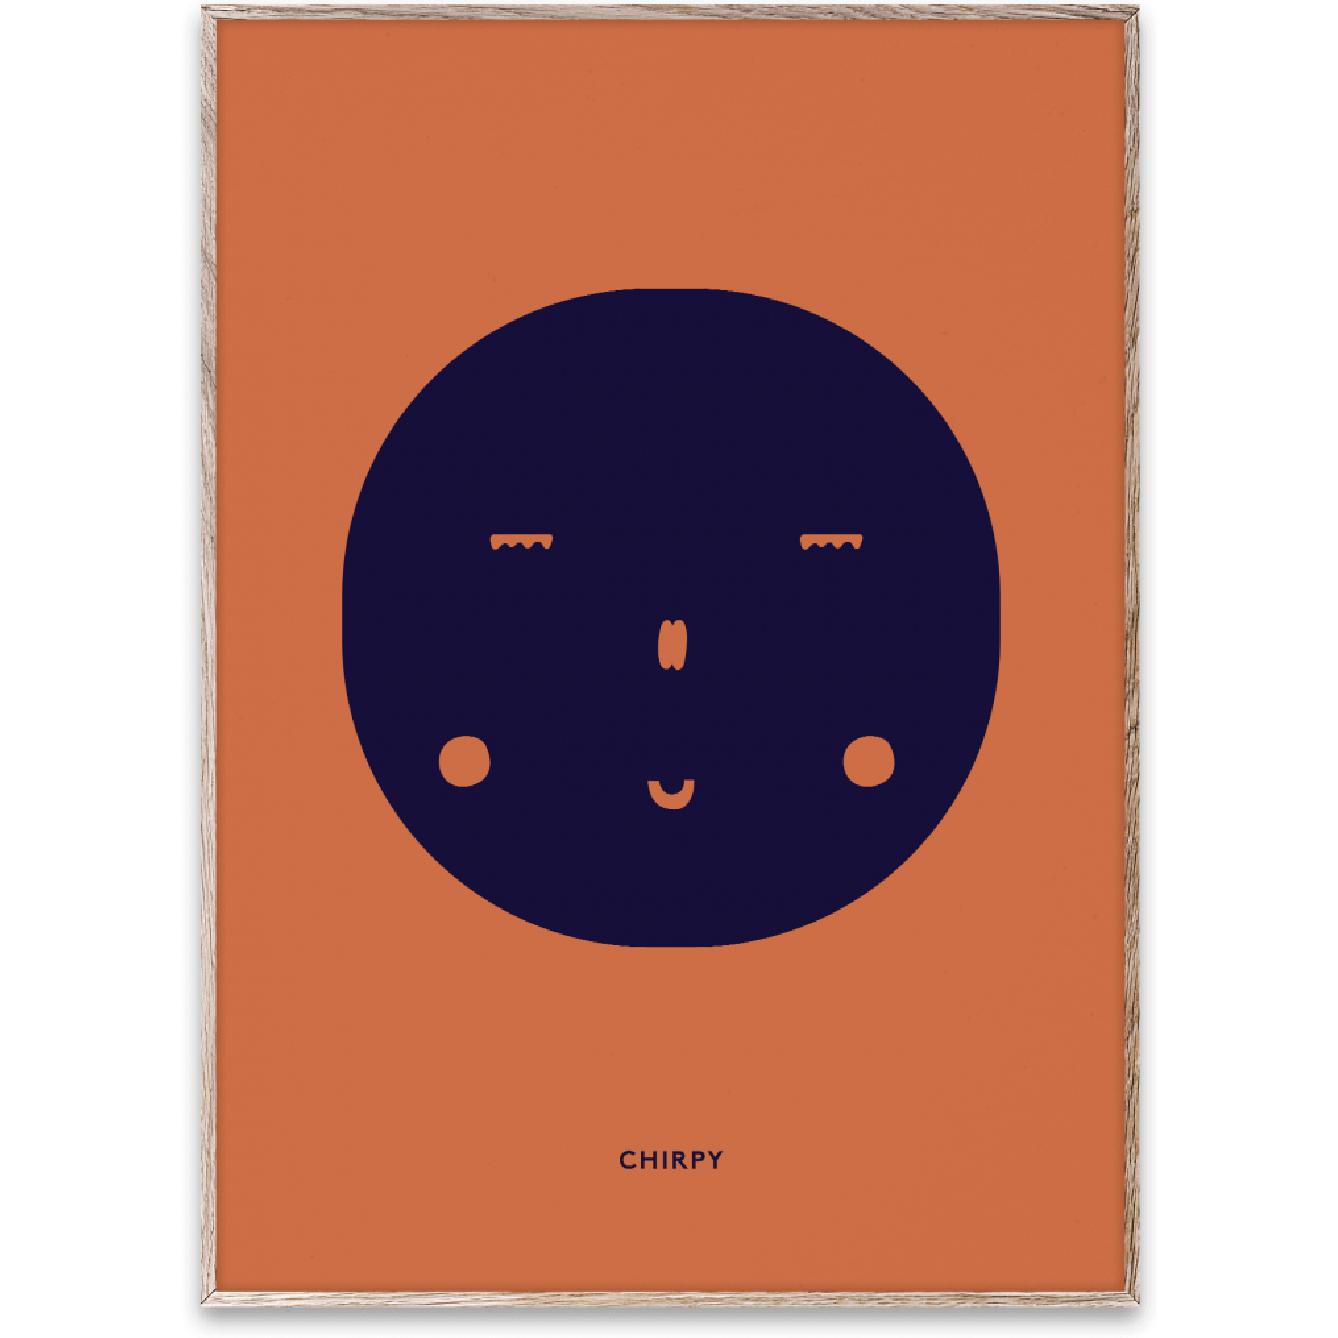 Paper Collective Circirpy Feeling Poster, 50x70 cm